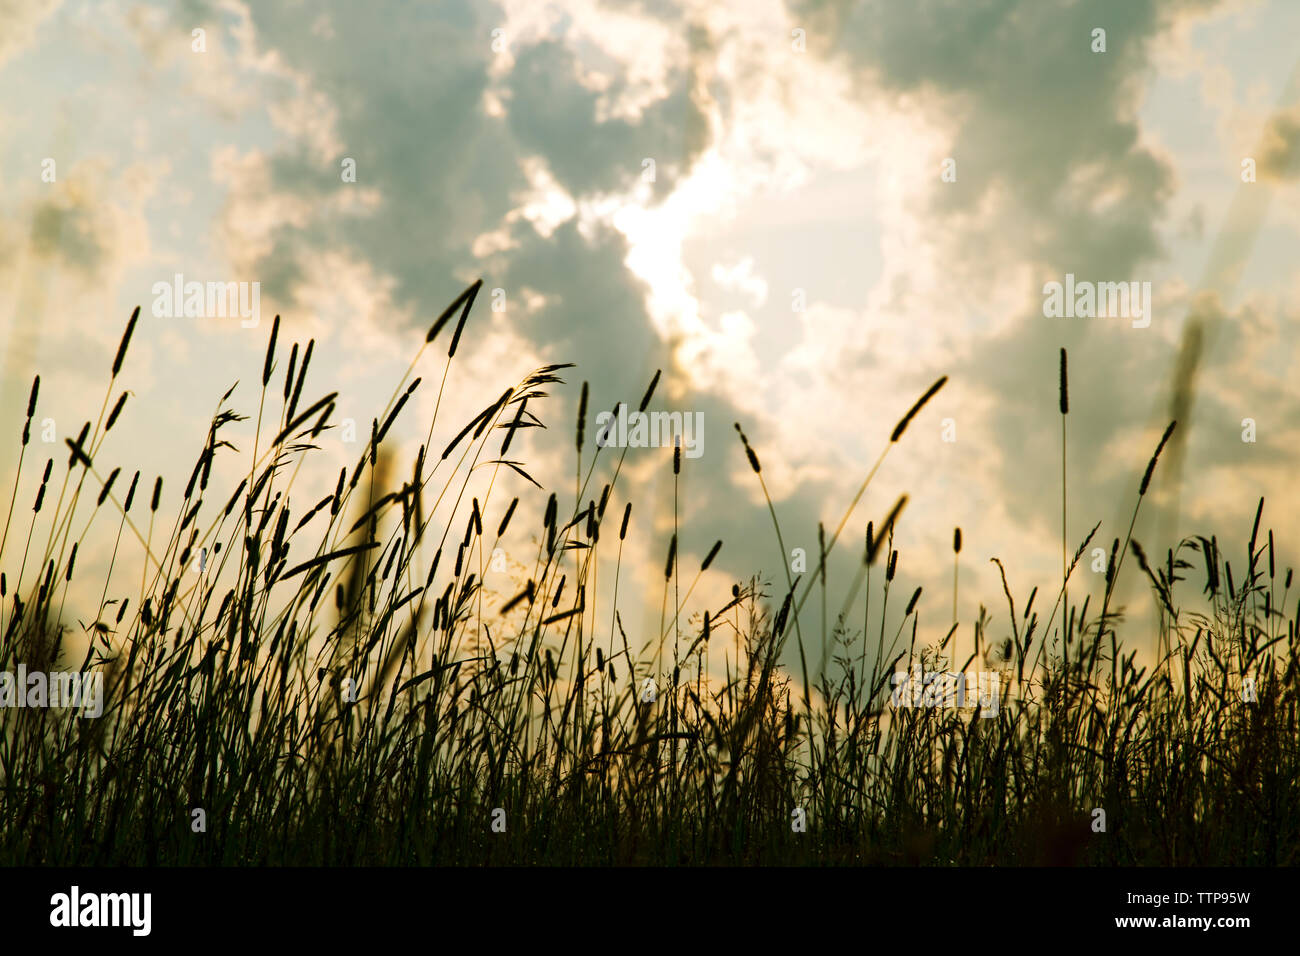 Low angle view of silhouette grass against cloudy sky during sunset Stock Photo